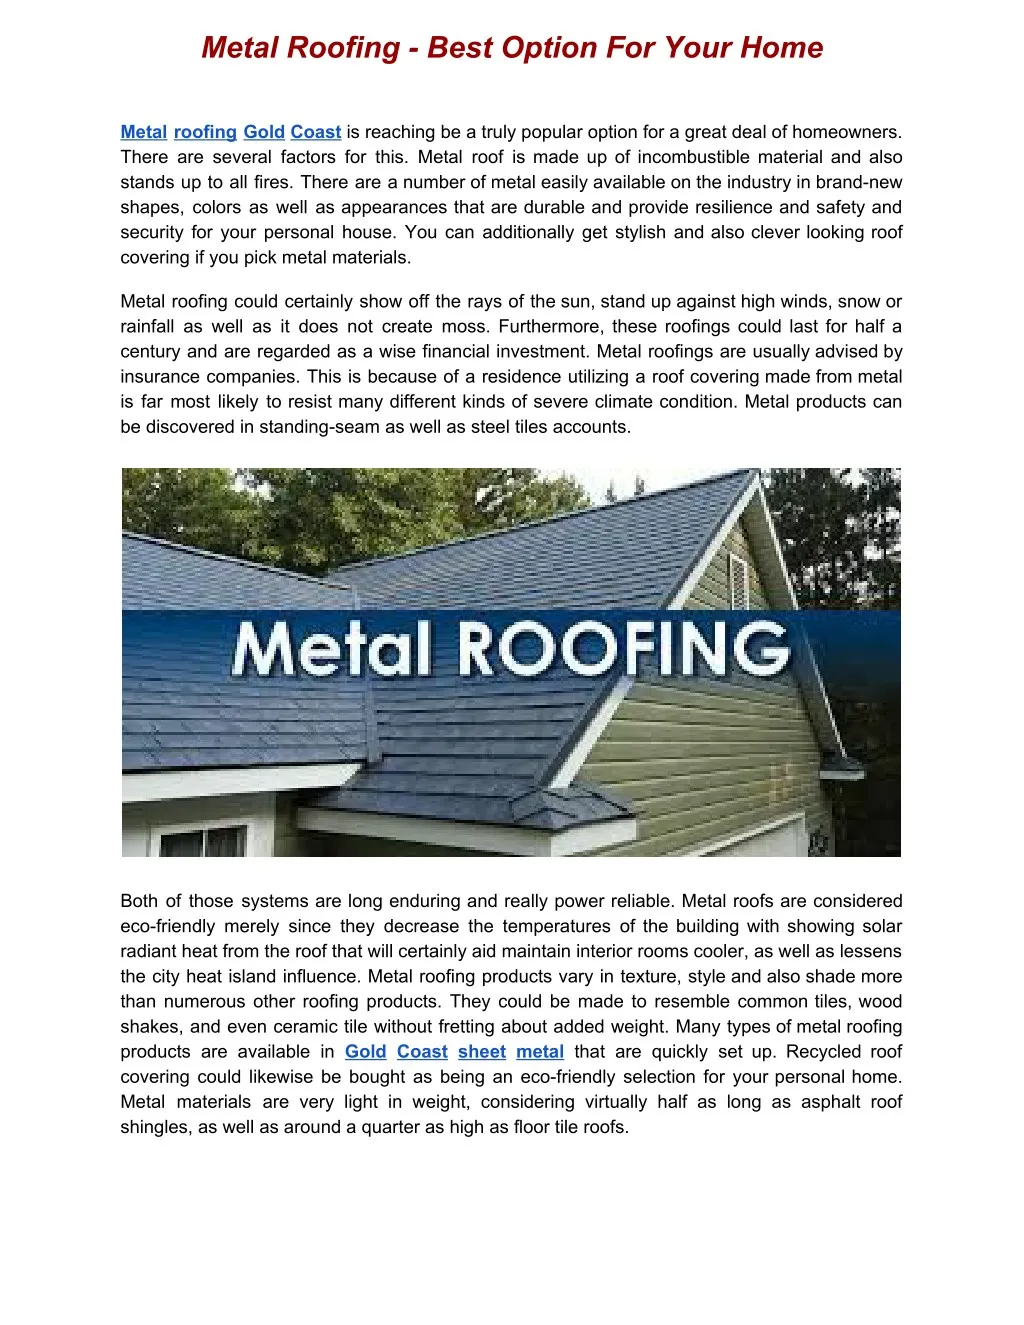 metal roofing best option for your home